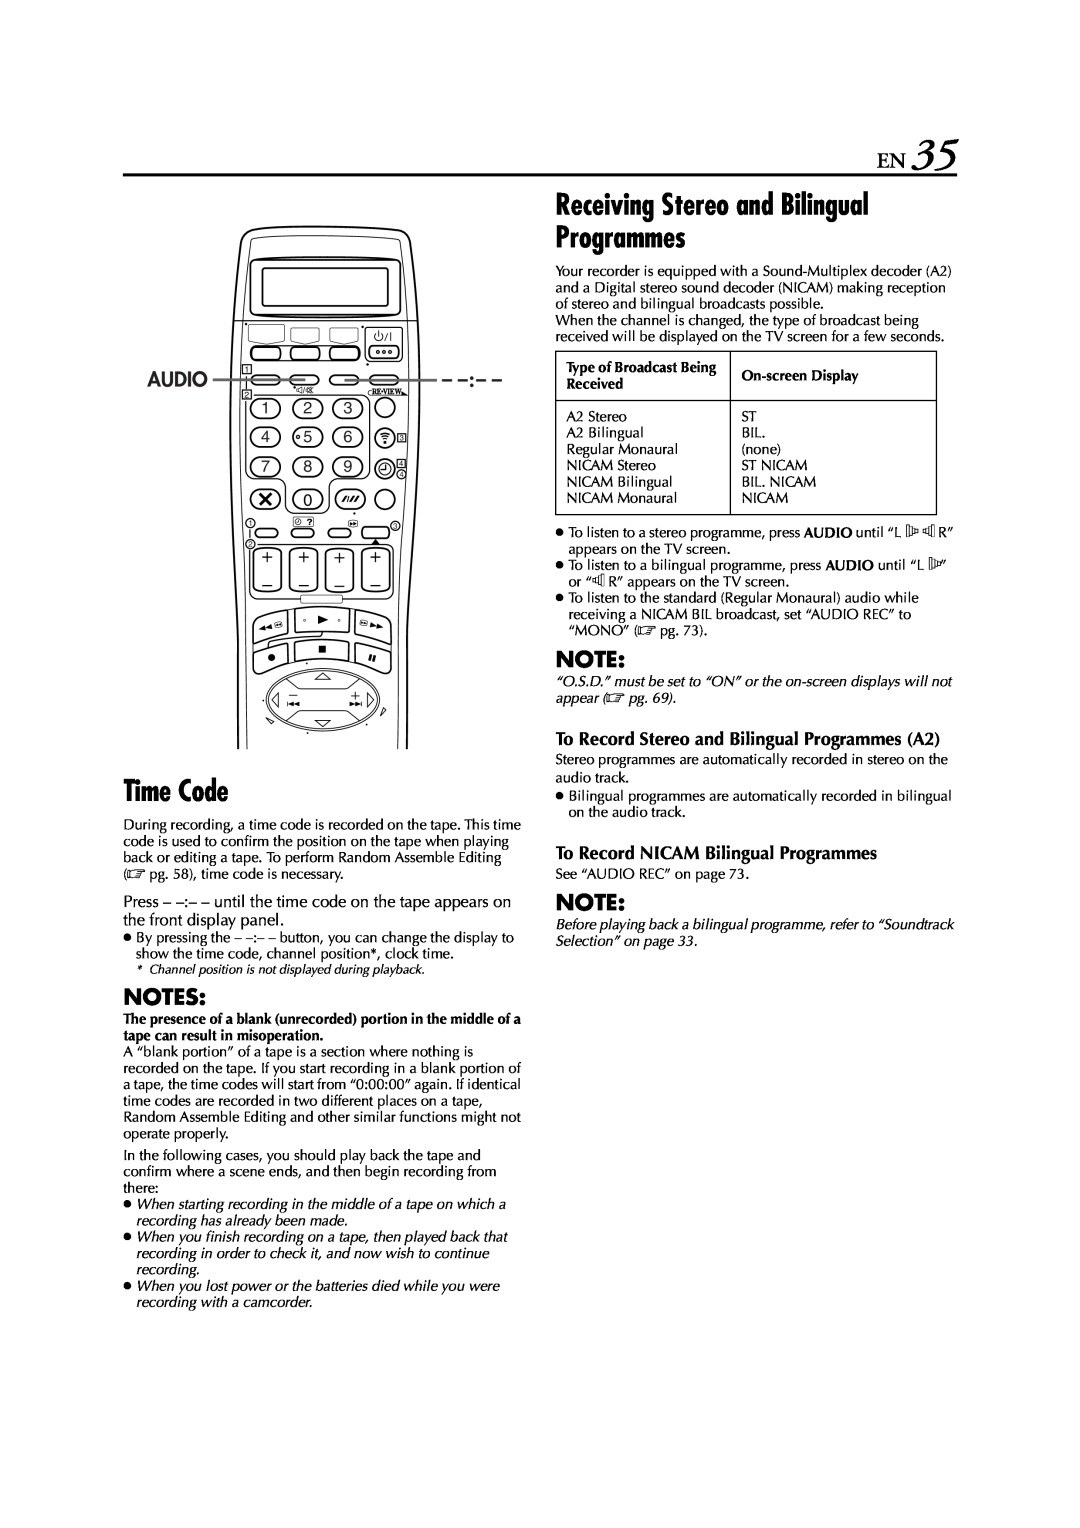 JVC LPT0616-001A specifications Time Code, Receiving Stereo and Bilingual Programmes, On-screen Display, Received 